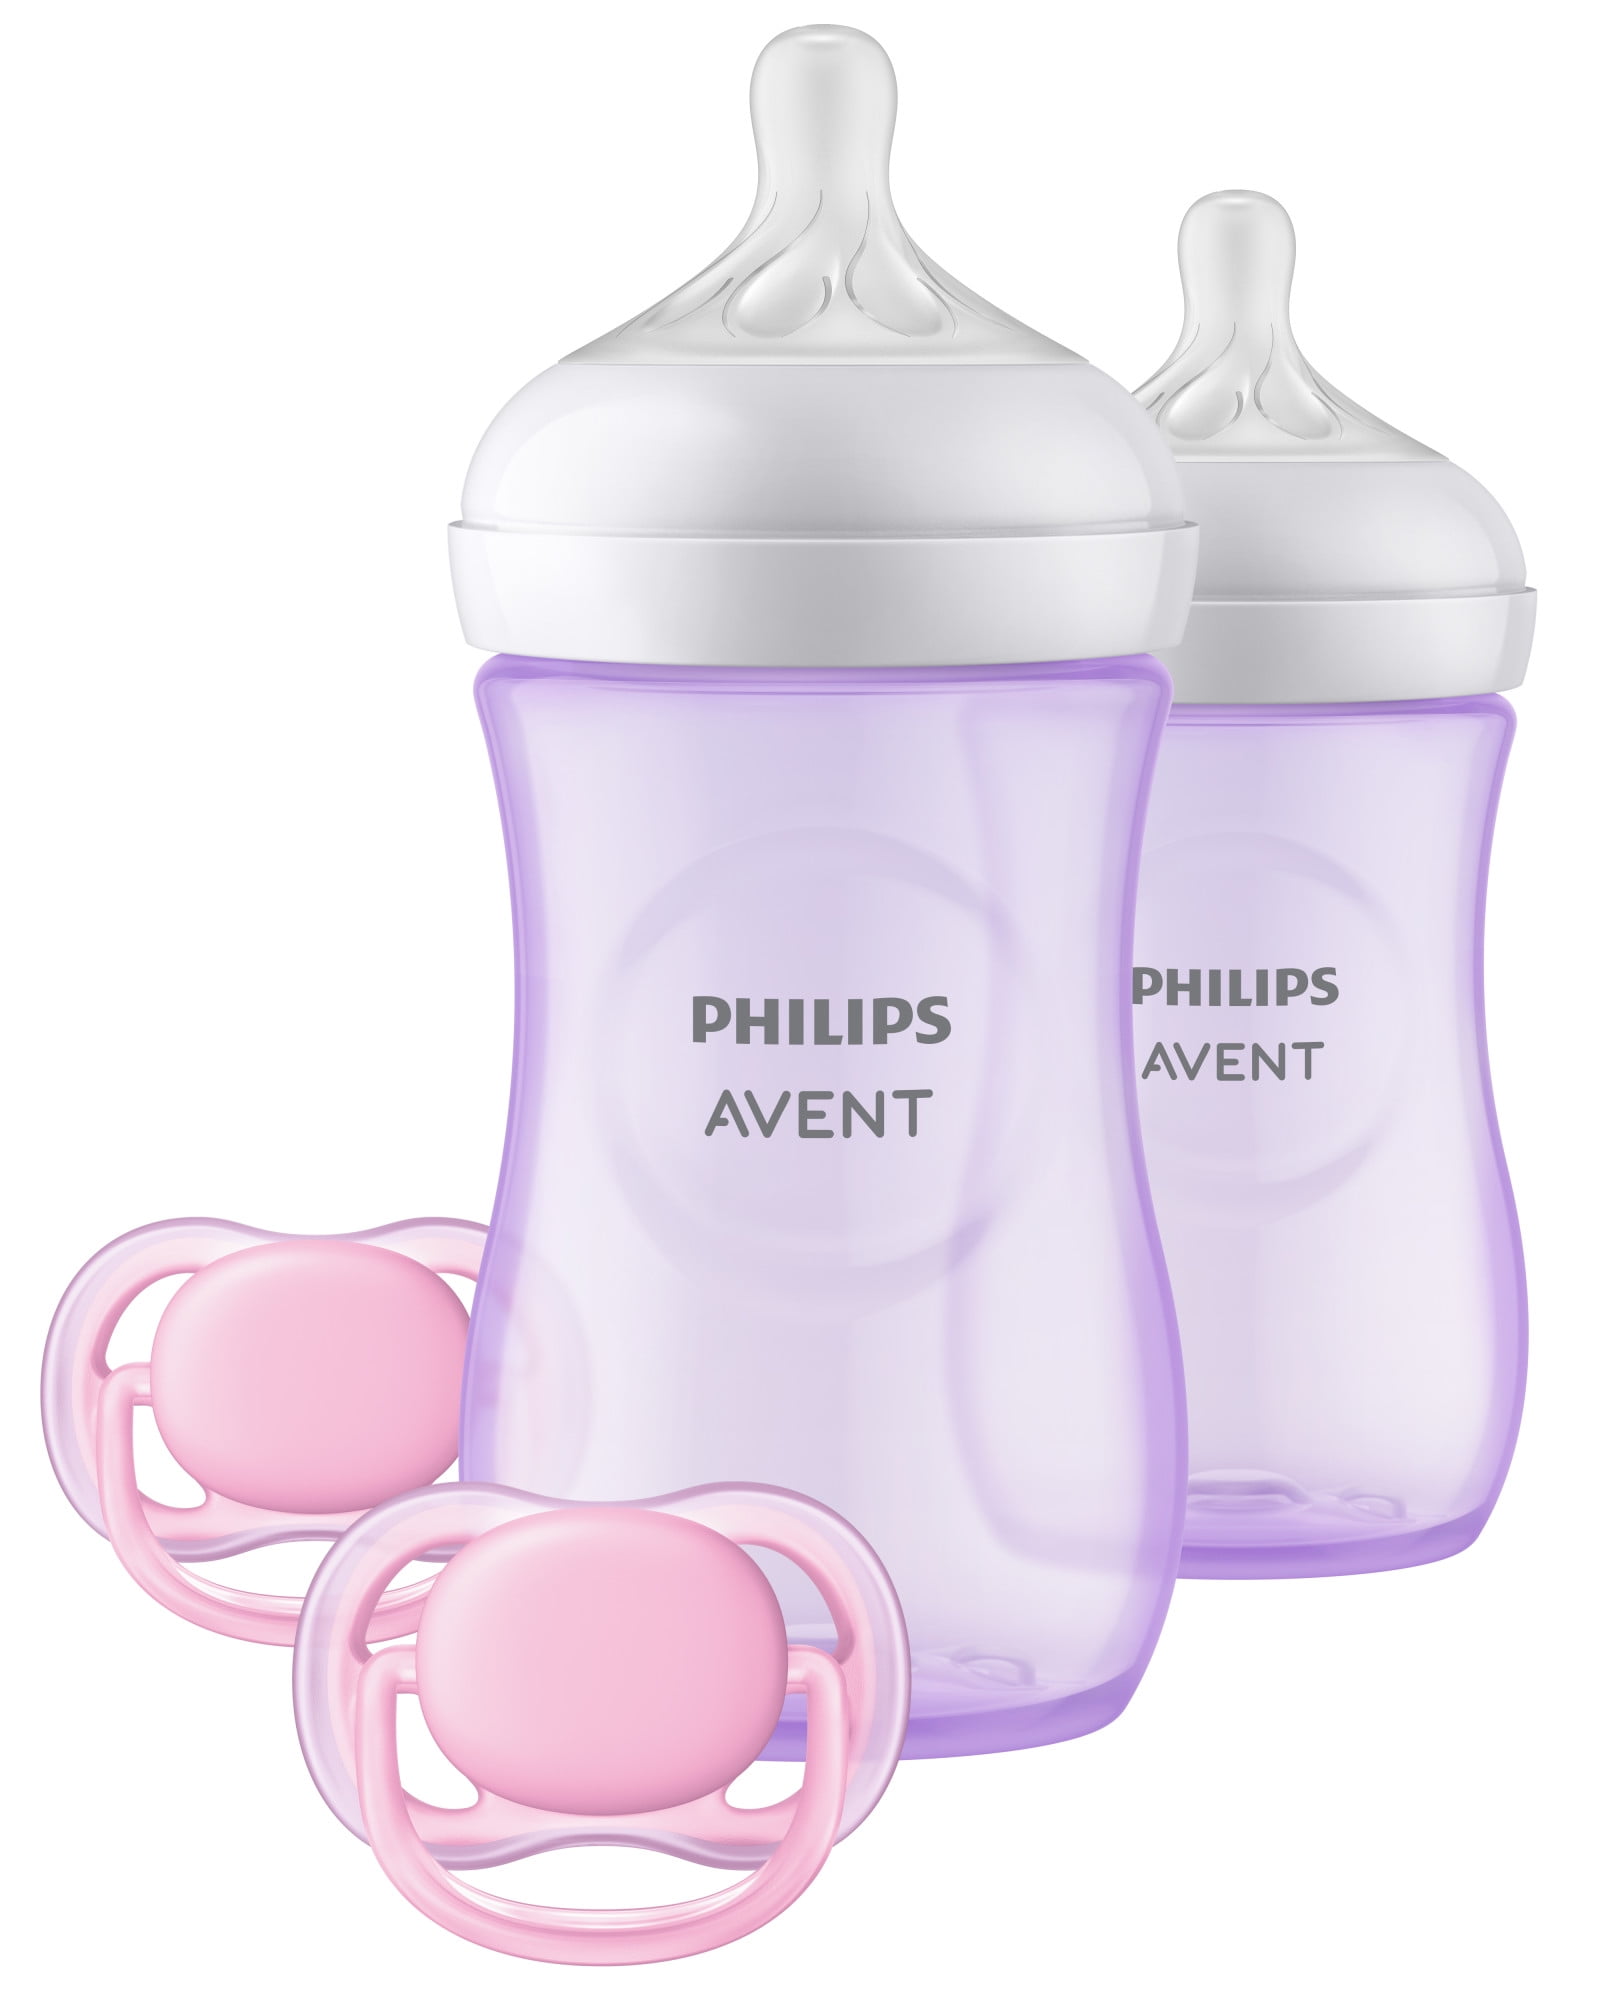 8oz Philips Avent Glass Natural Baby Bottle with Natural Response Nipple SCY913/04 4pk 